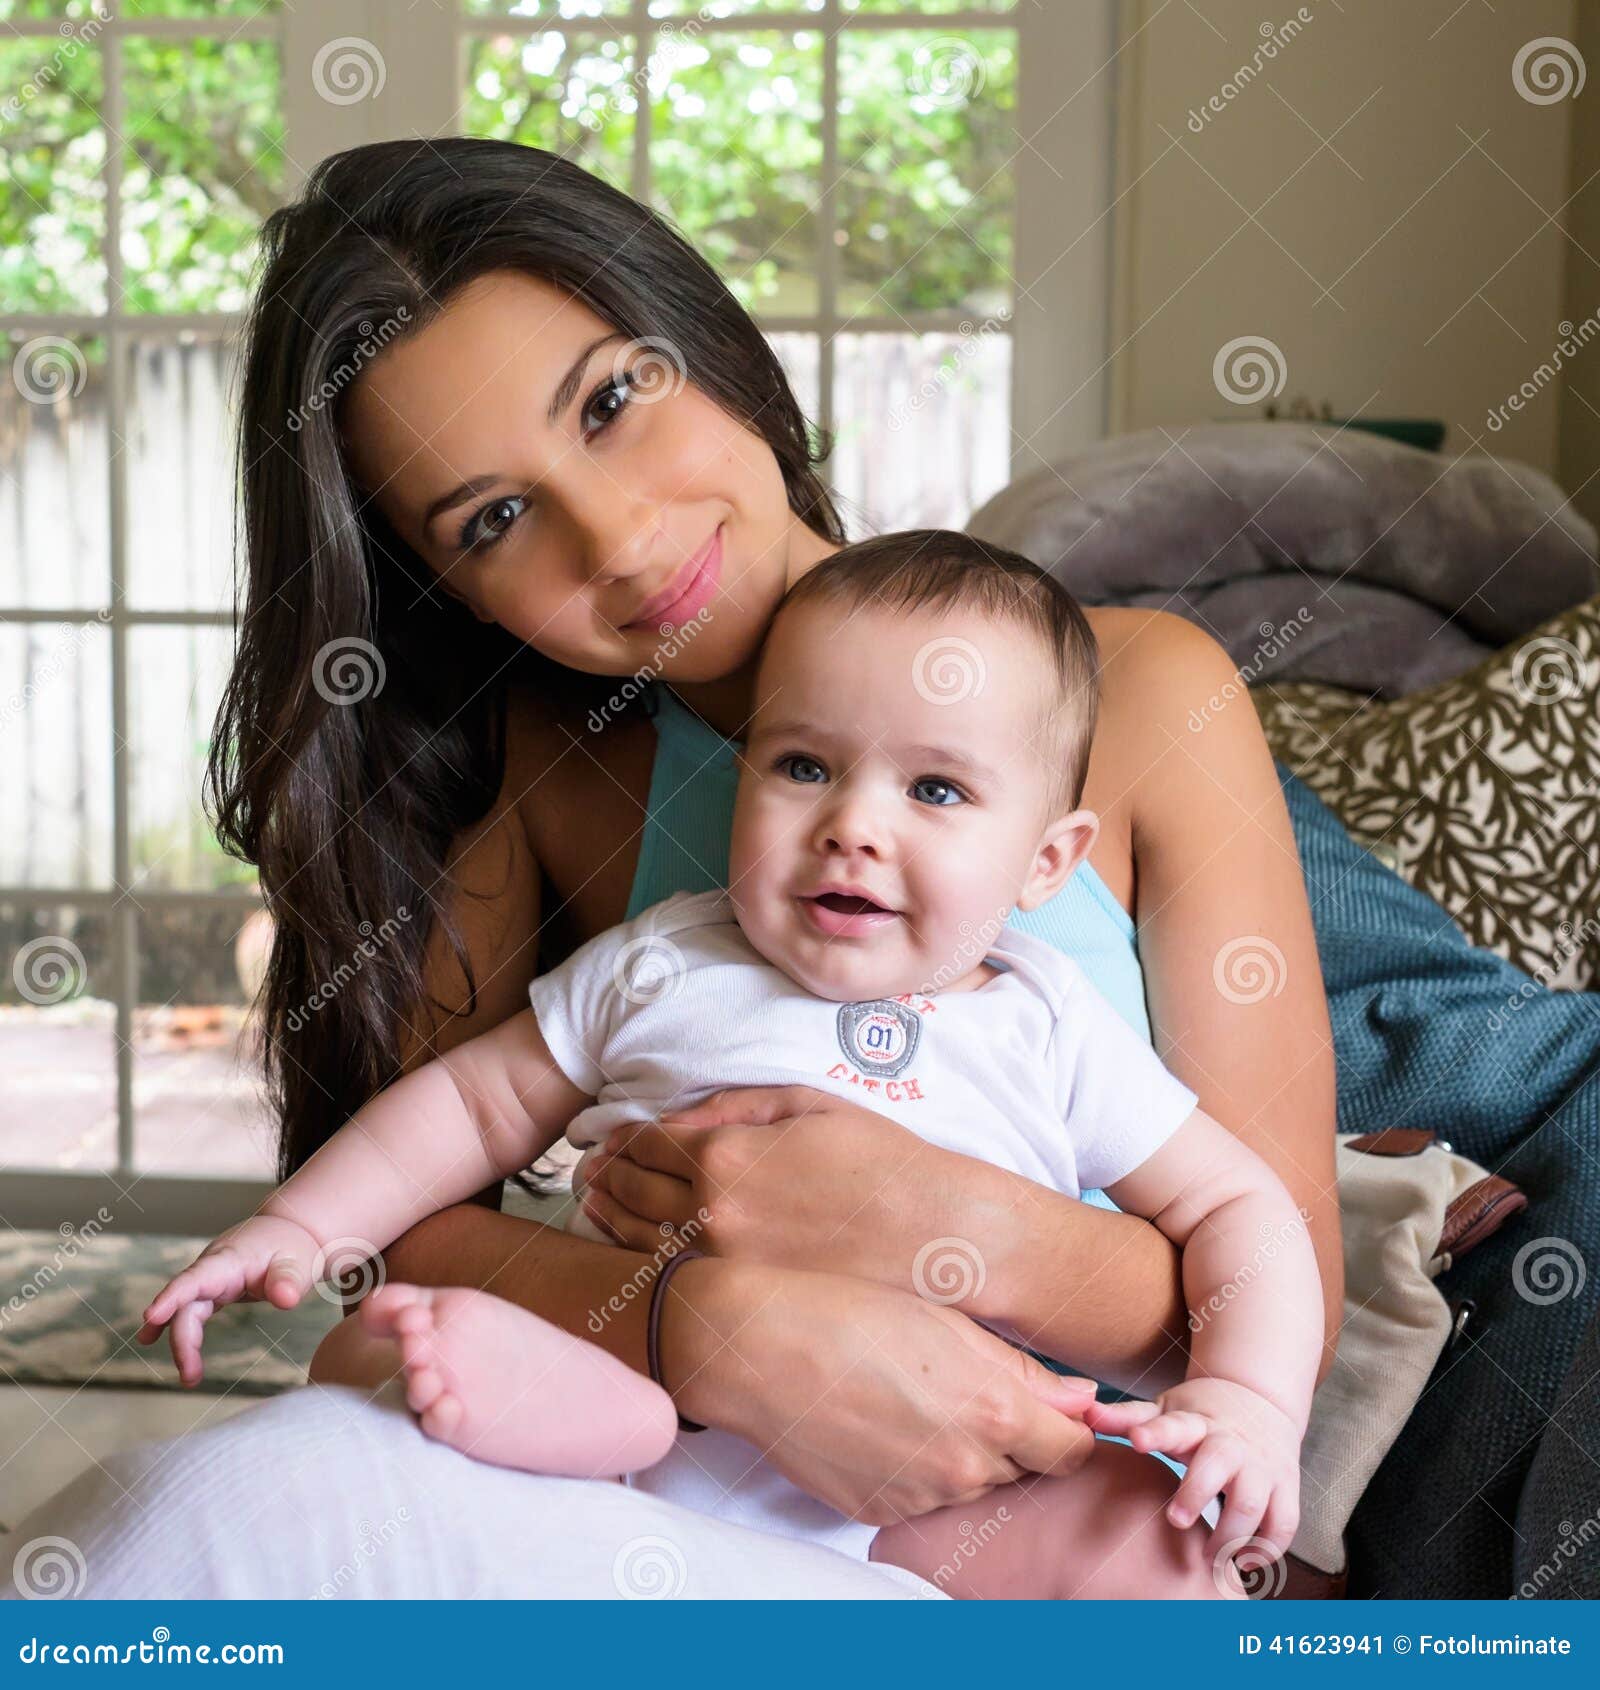 Baby love stock image. Image of latino, adult, baby, cute - 41623941